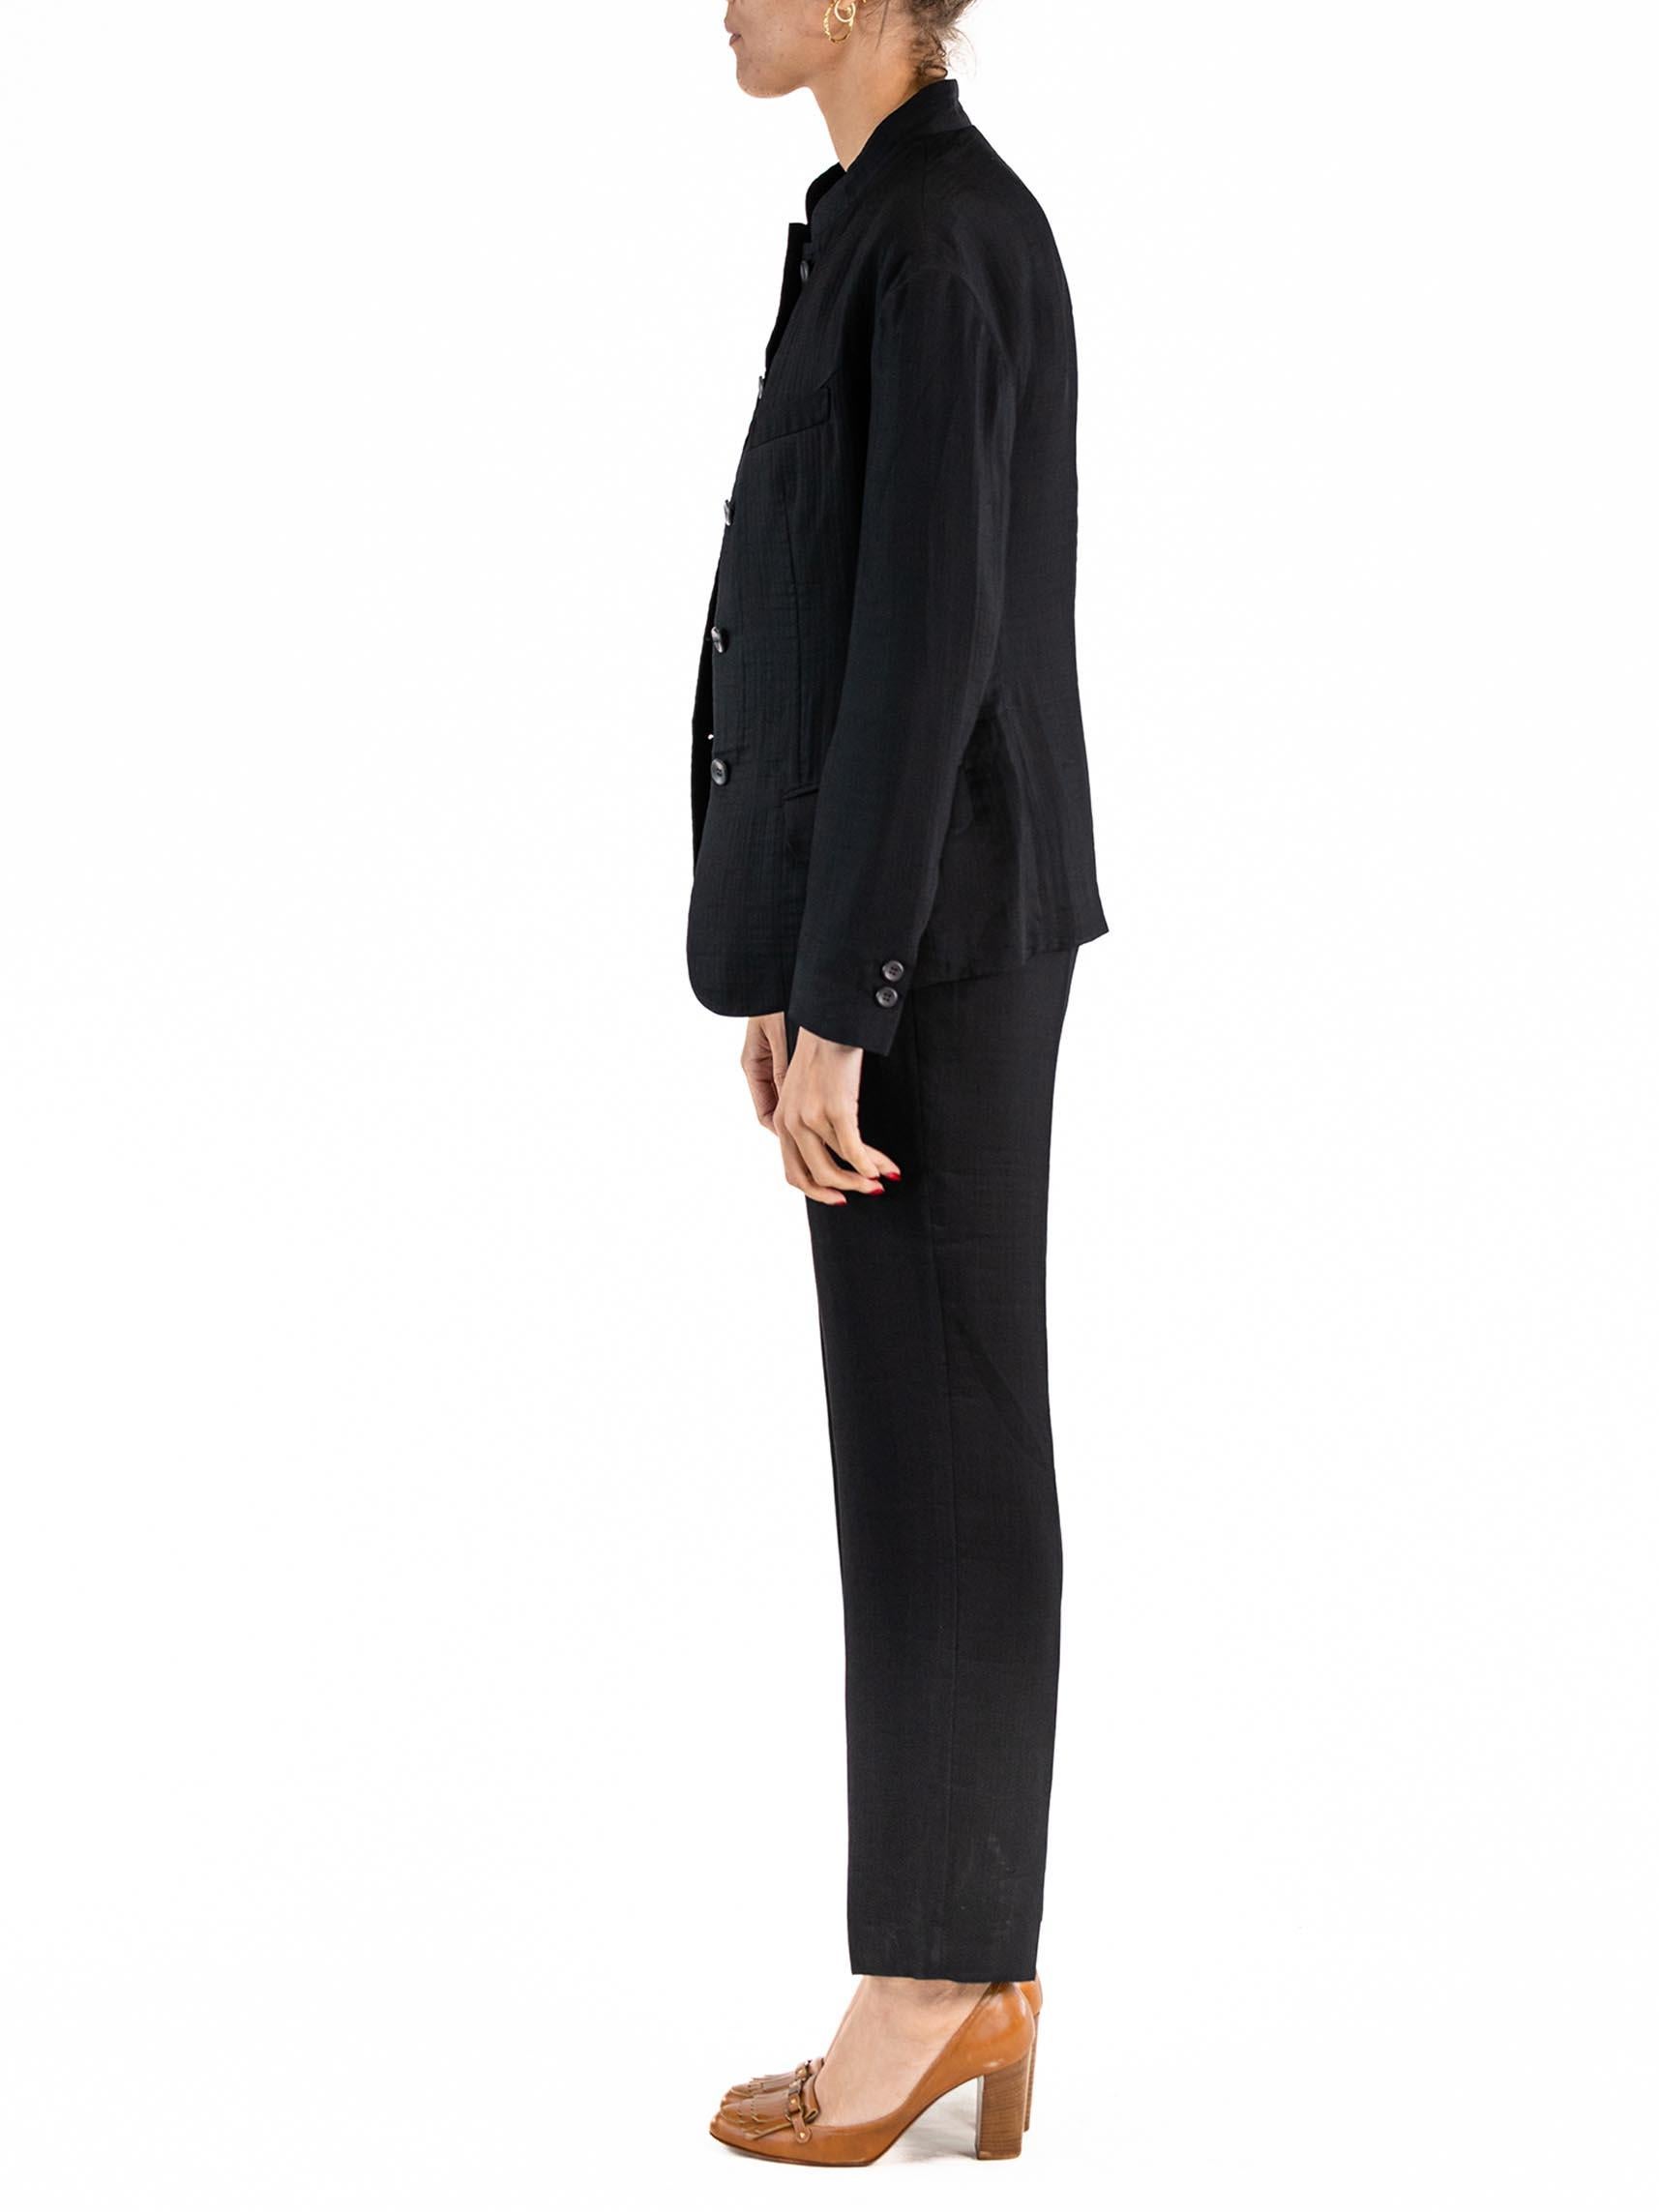 1990S ISSEY MIYAKE Black Rayon Blend Lightweight Pucker Double-Weave Pant Suit In Excellent Condition For Sale In New York, NY